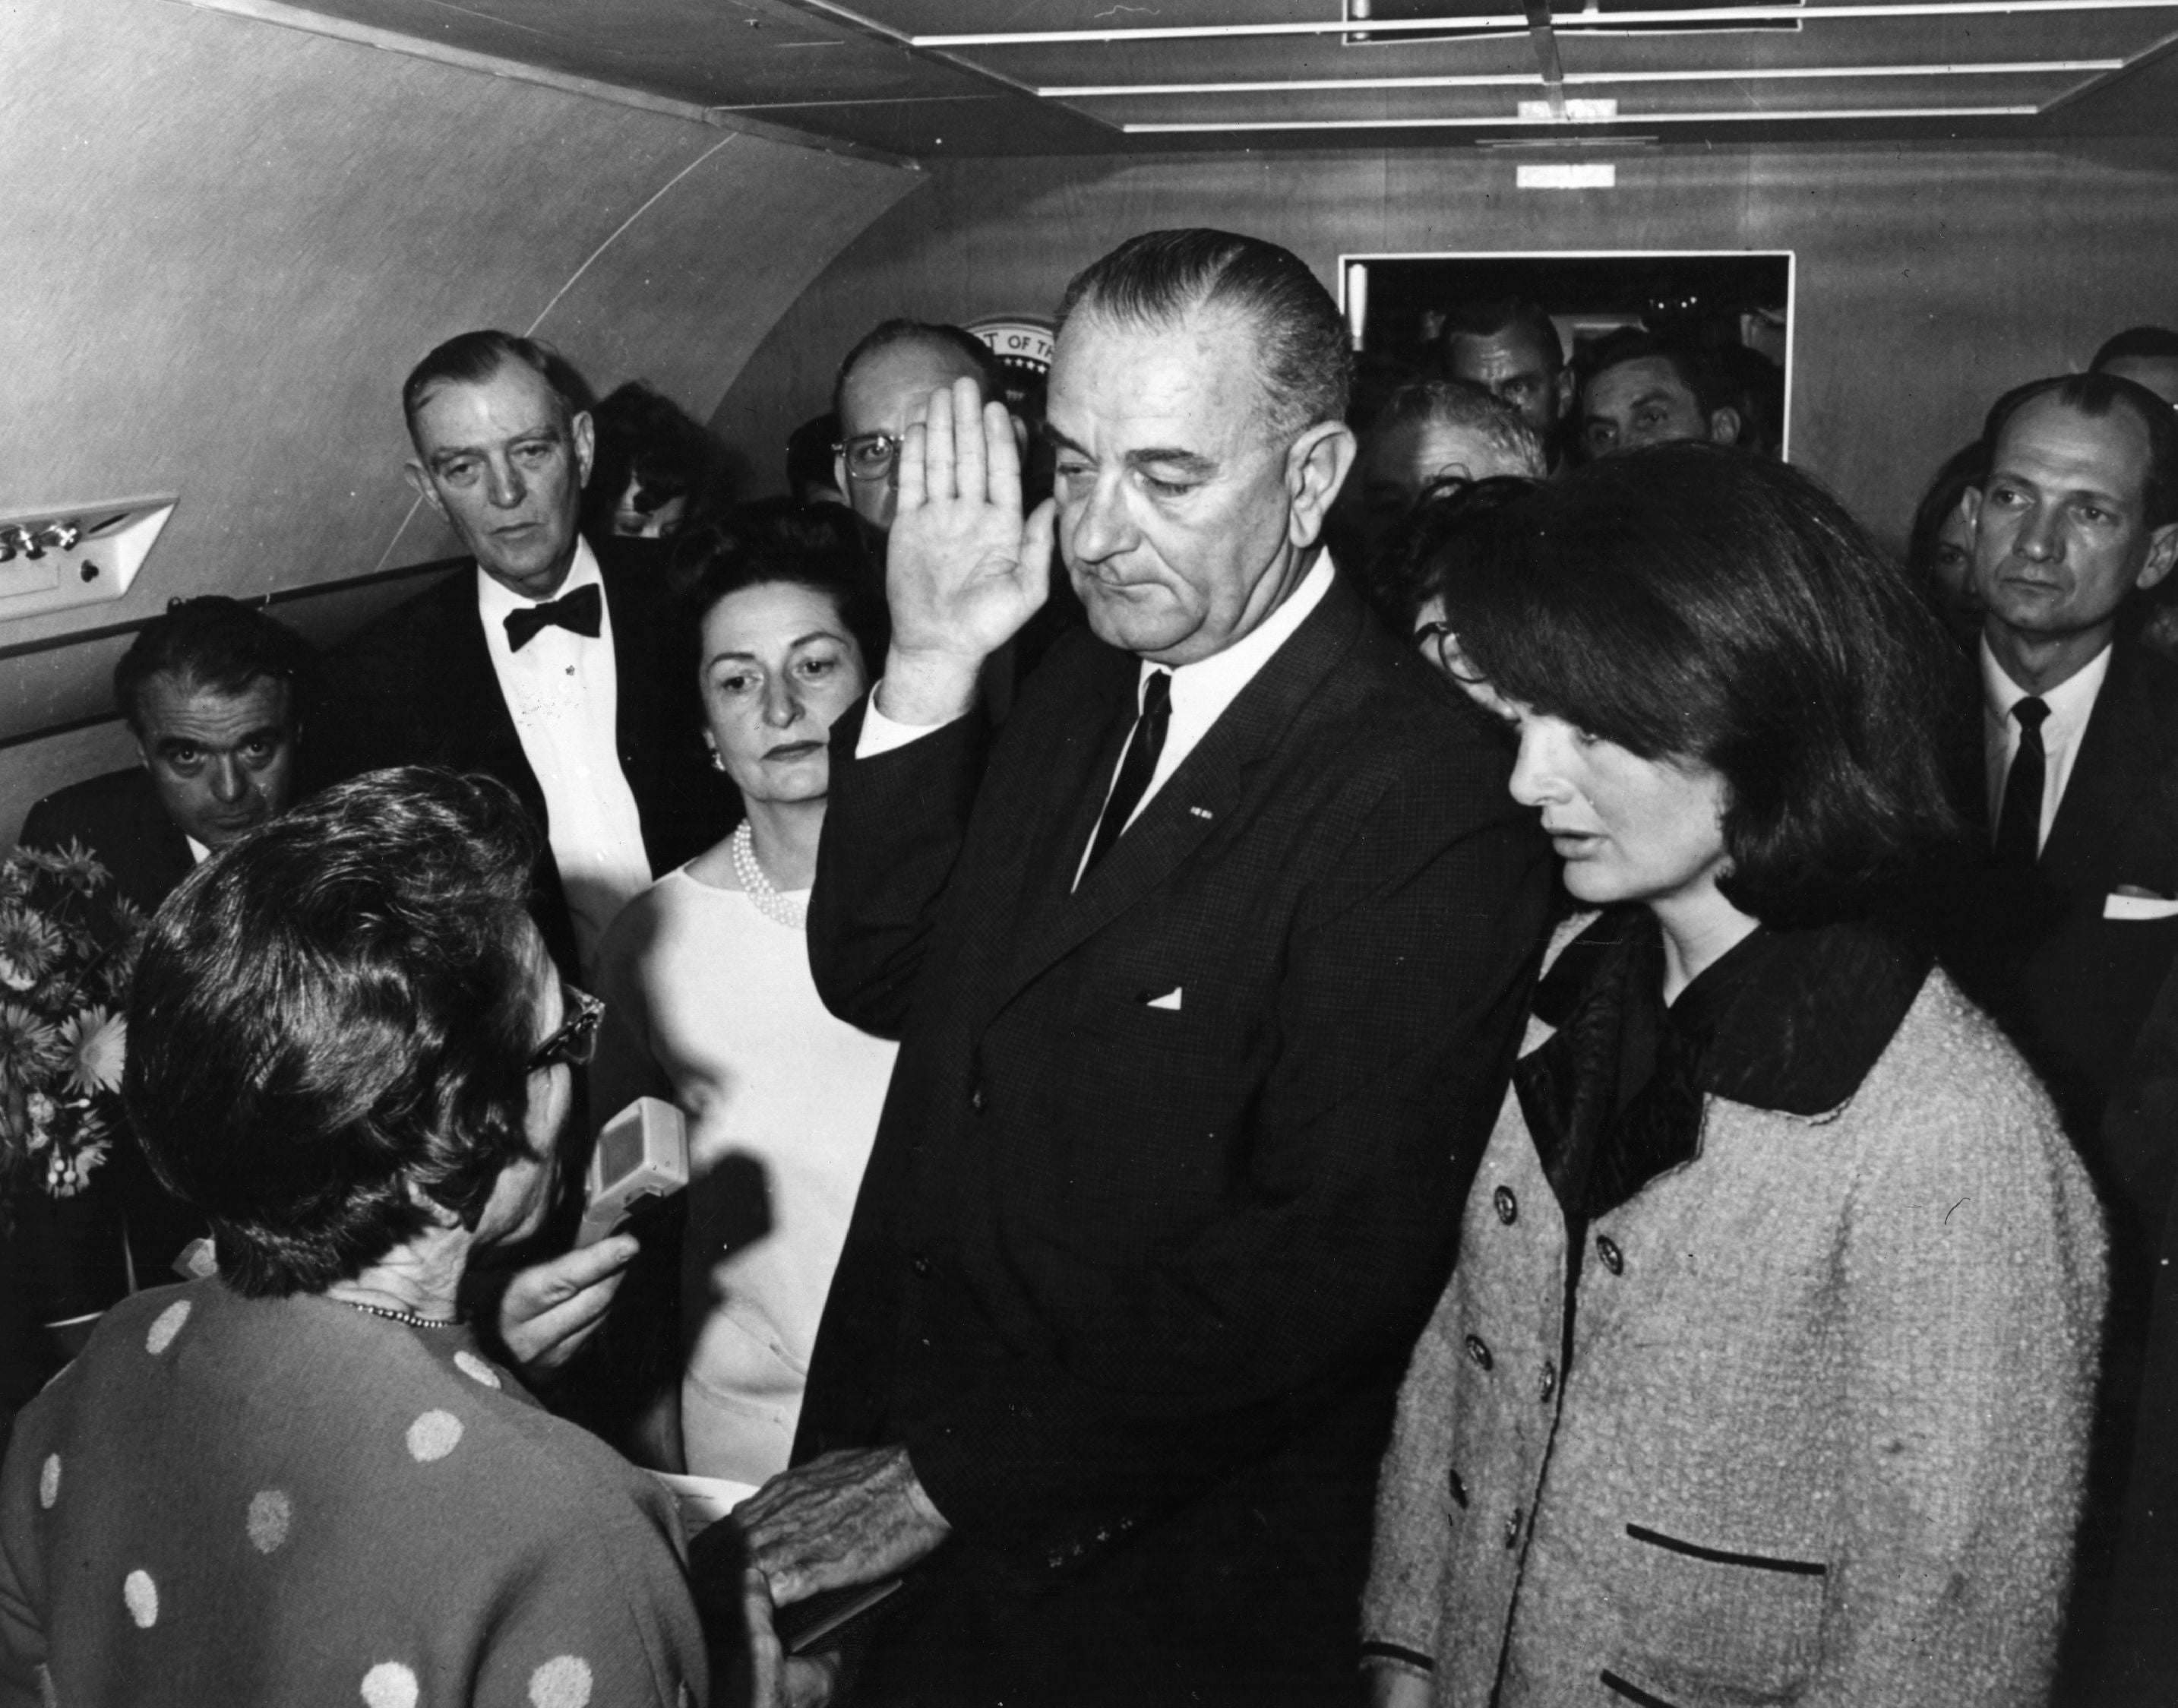 Kennedy’s vice president Lyndon Johnson is sworn in as the 36th President of the United States of America on board the presdential plane after Kennedy was pronounced dead